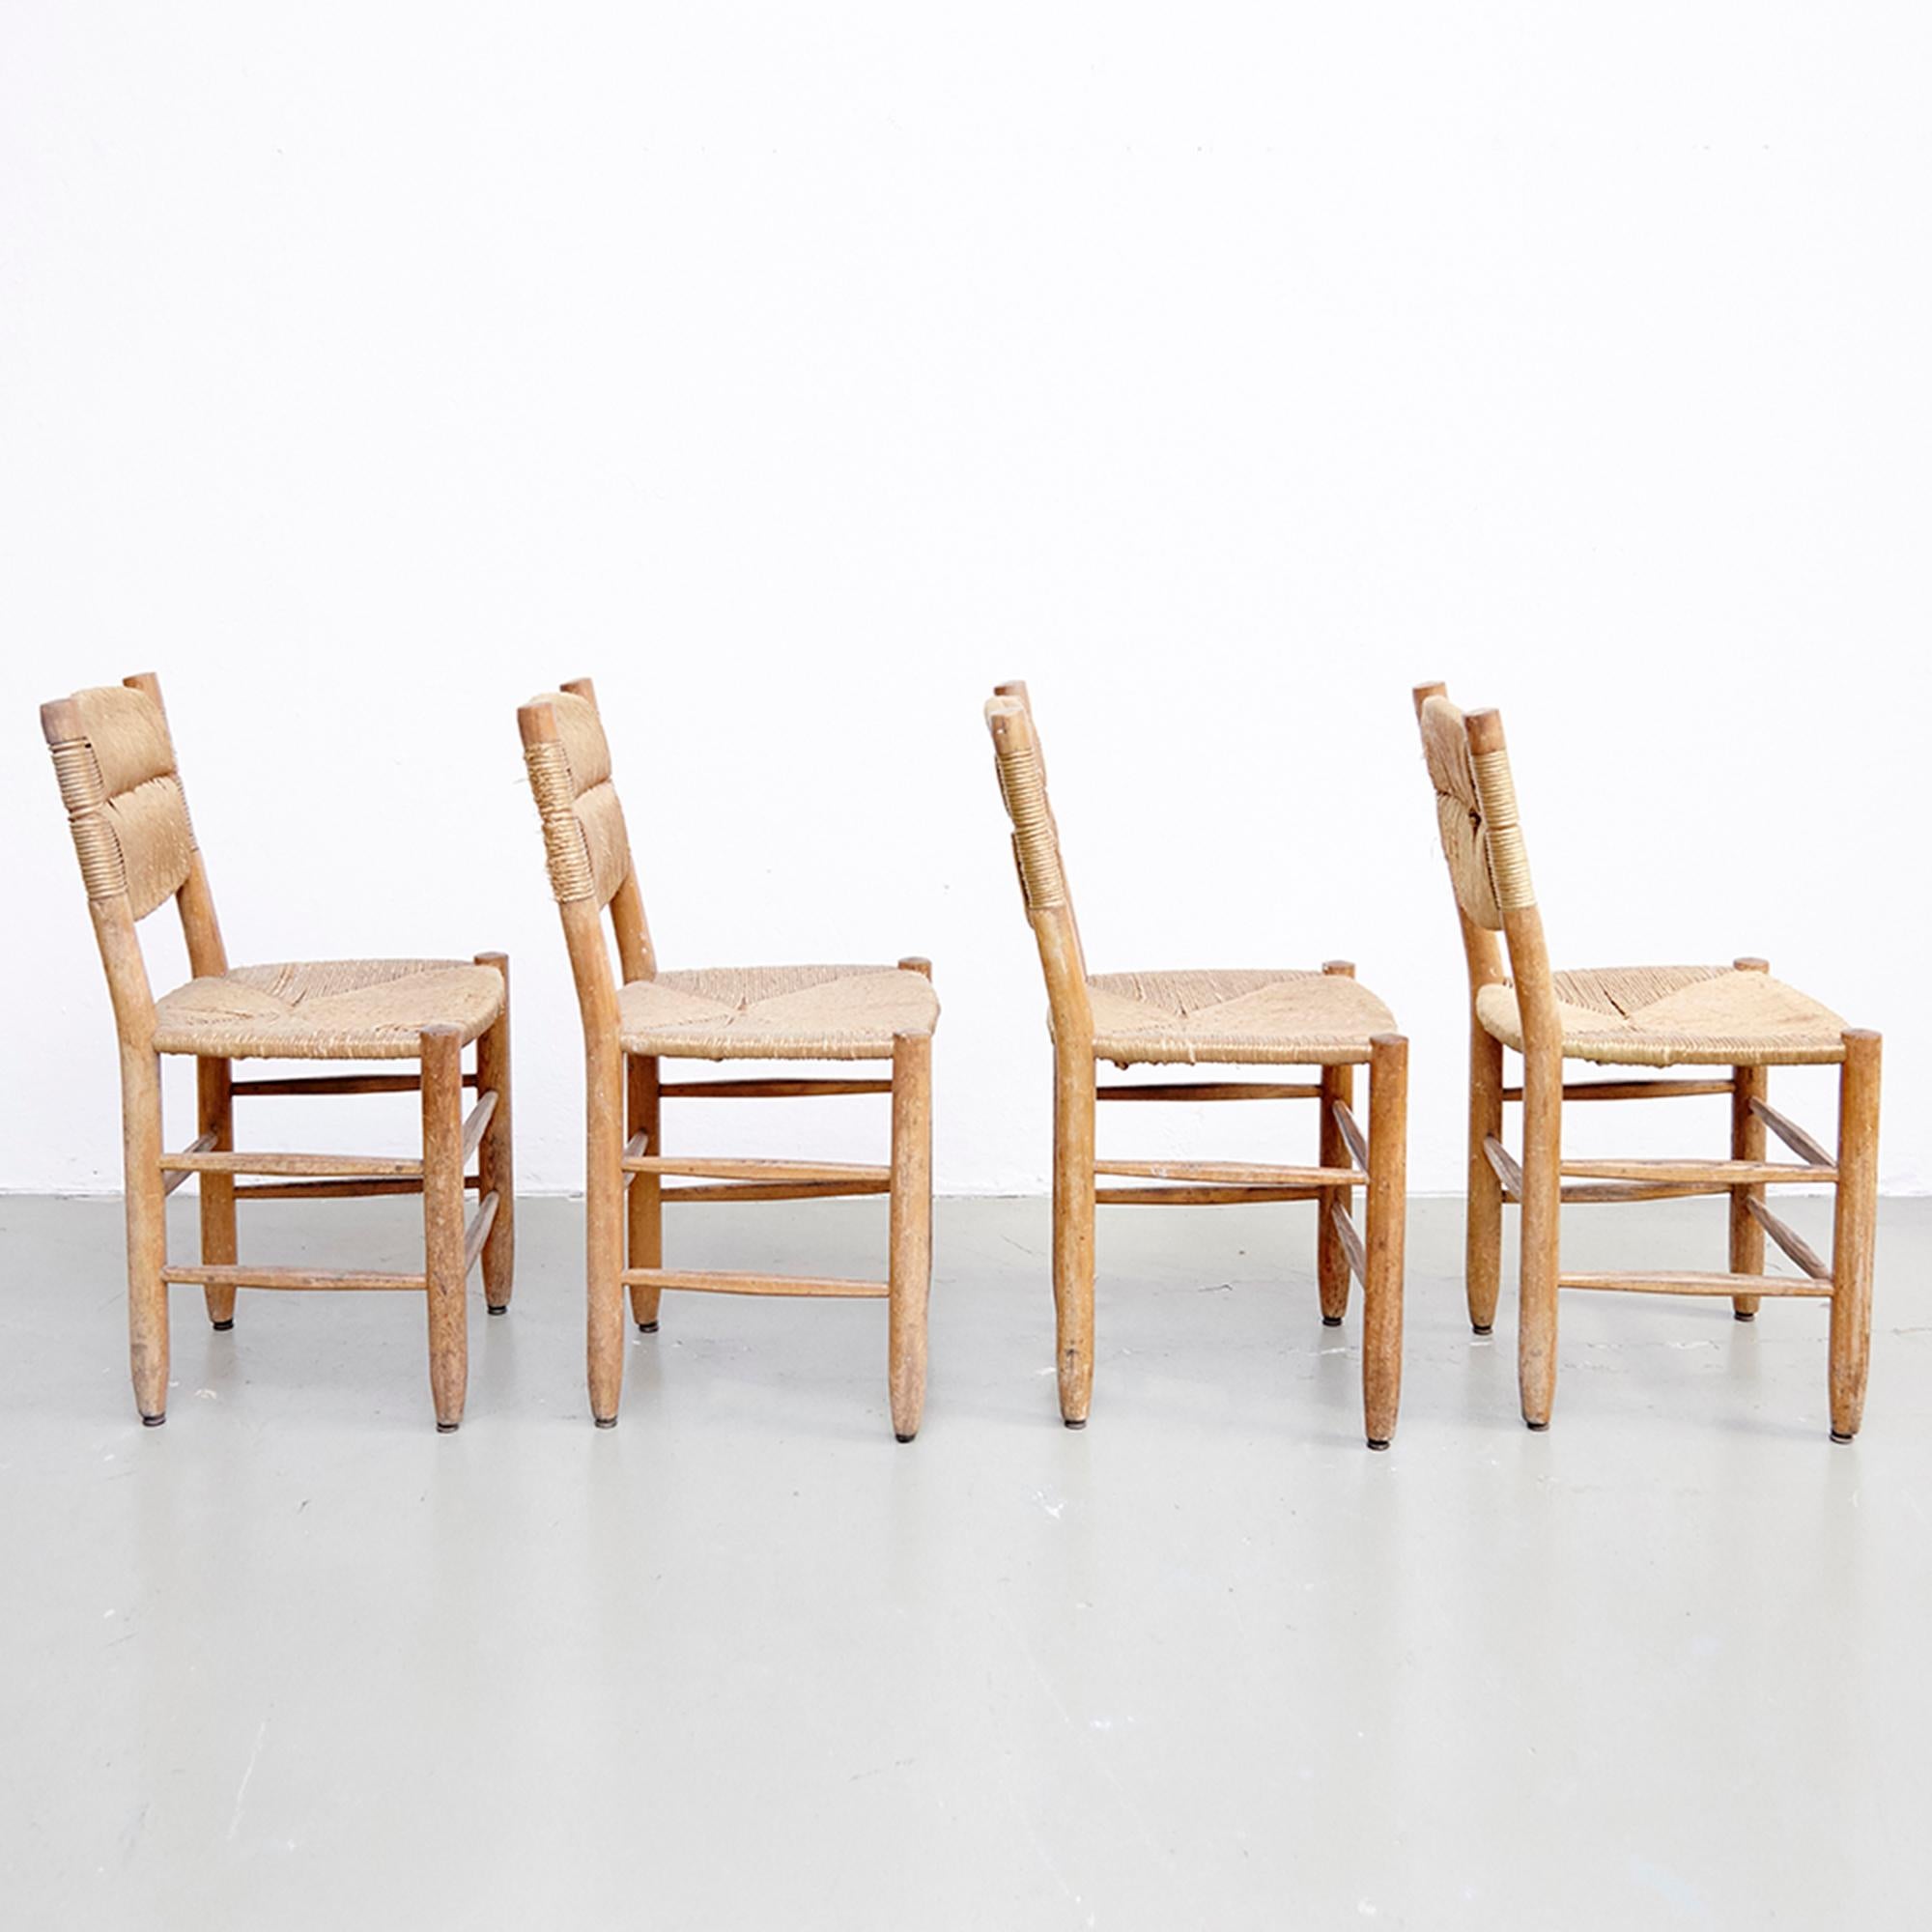 Mid-Century Modern Set of Four Charlotte Perriand Chairs, circa 1950